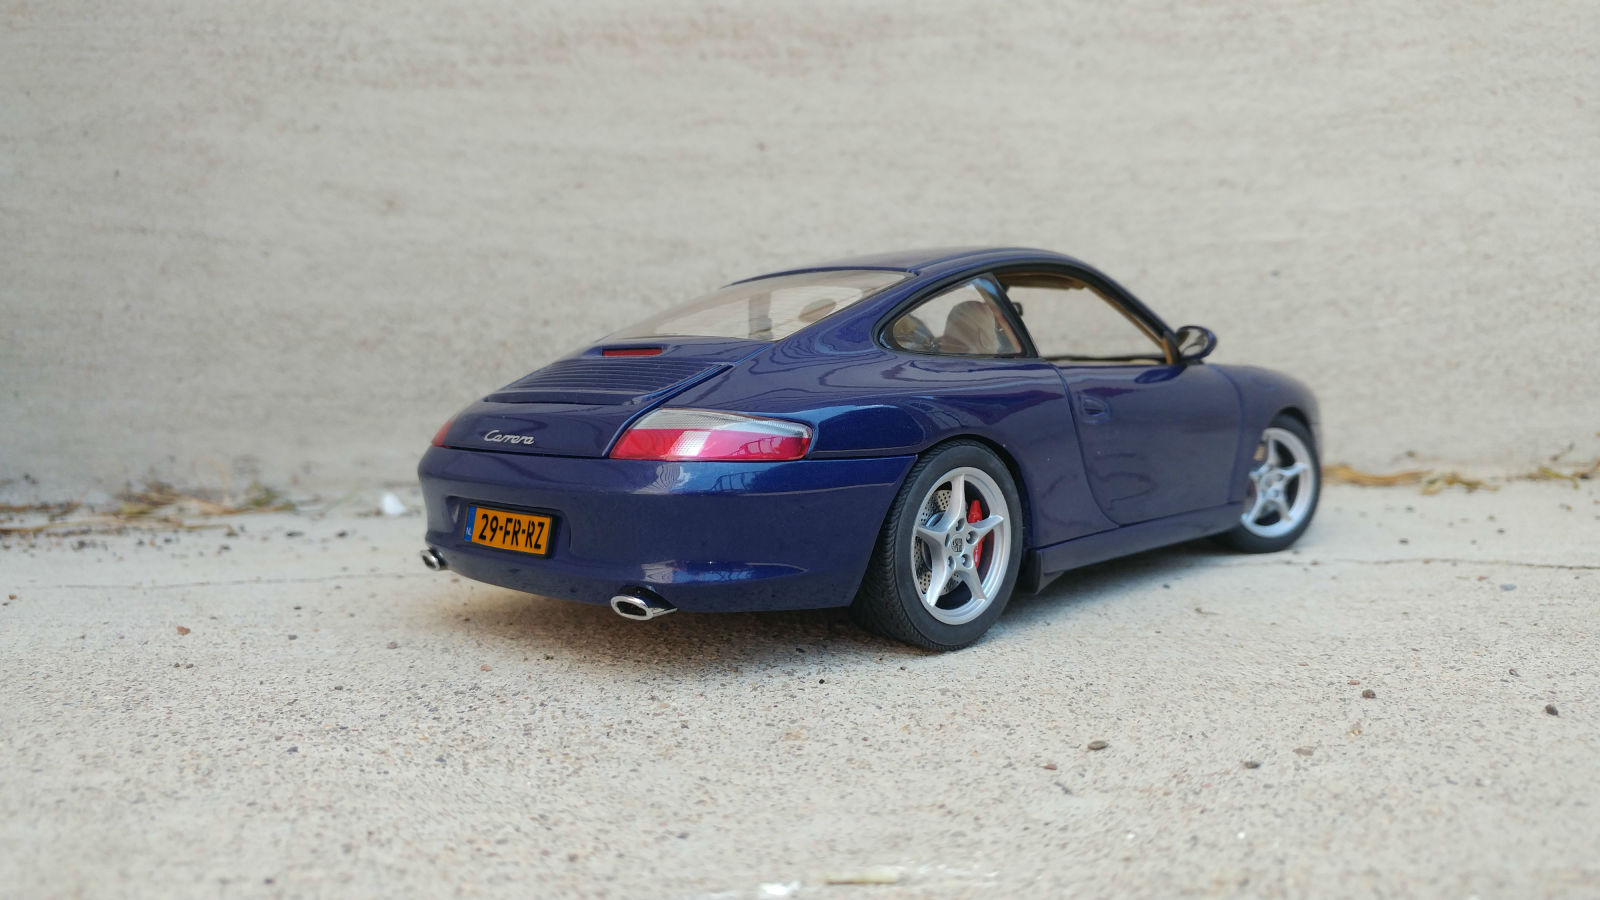 Illustration for article titled Porsche 996 On the Front Stoop